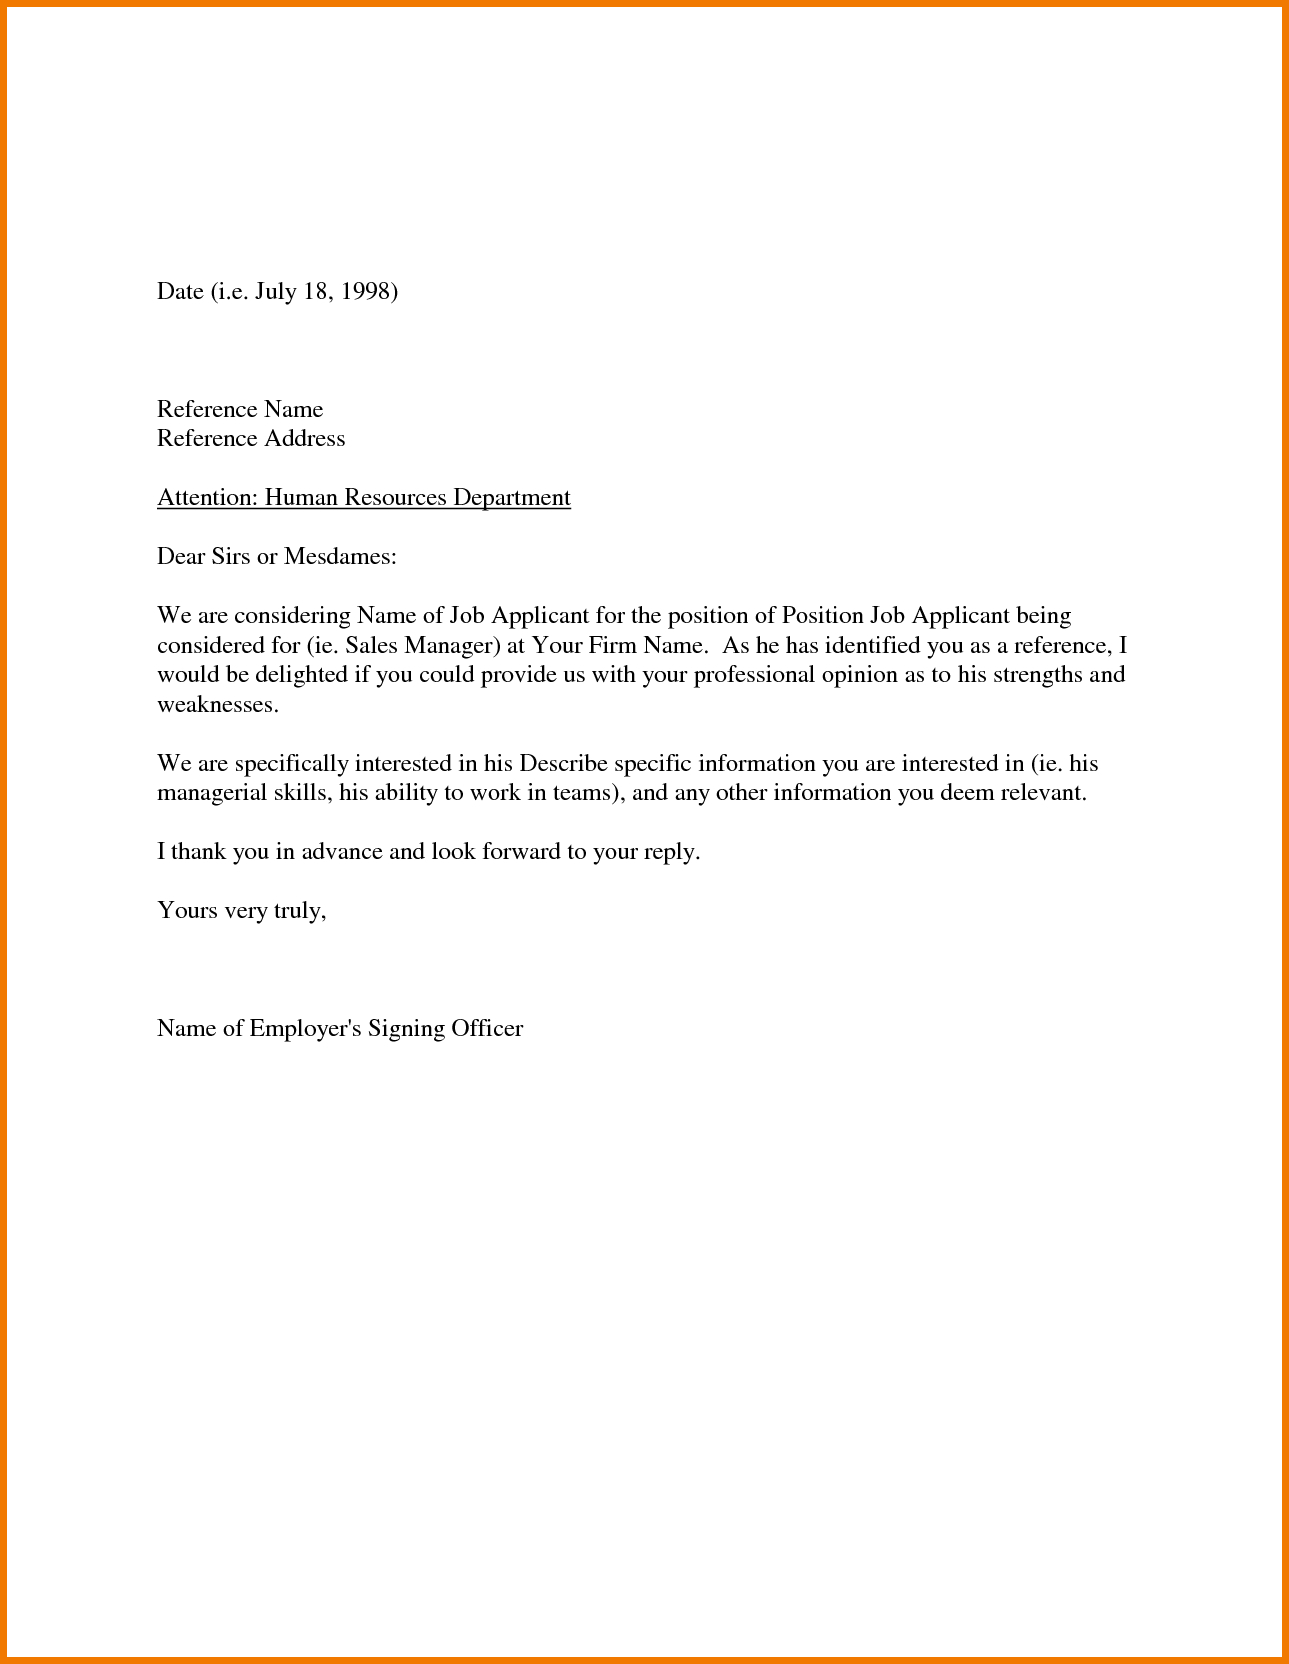 Blank Template For Letter Of Recommendation • Invitation within Letter Of Recomendation Template